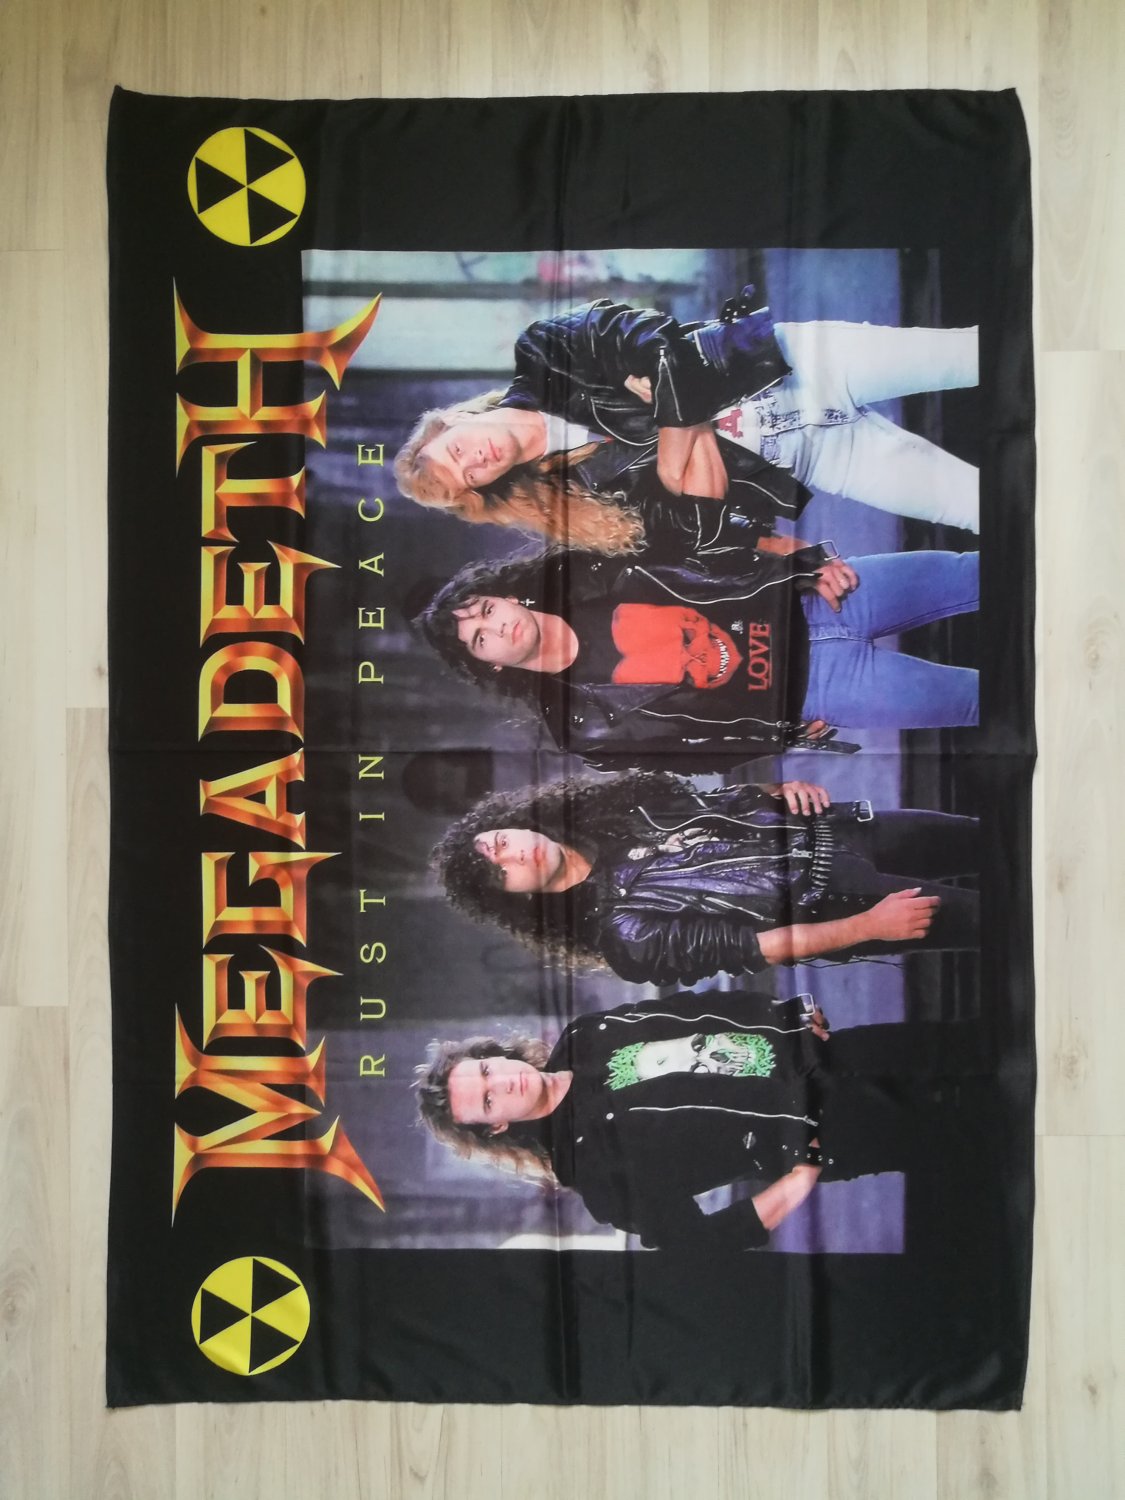 MEGADETH - Band photo Rust in peace FLAG Thrash Metal cloth poster Dave Mustaine